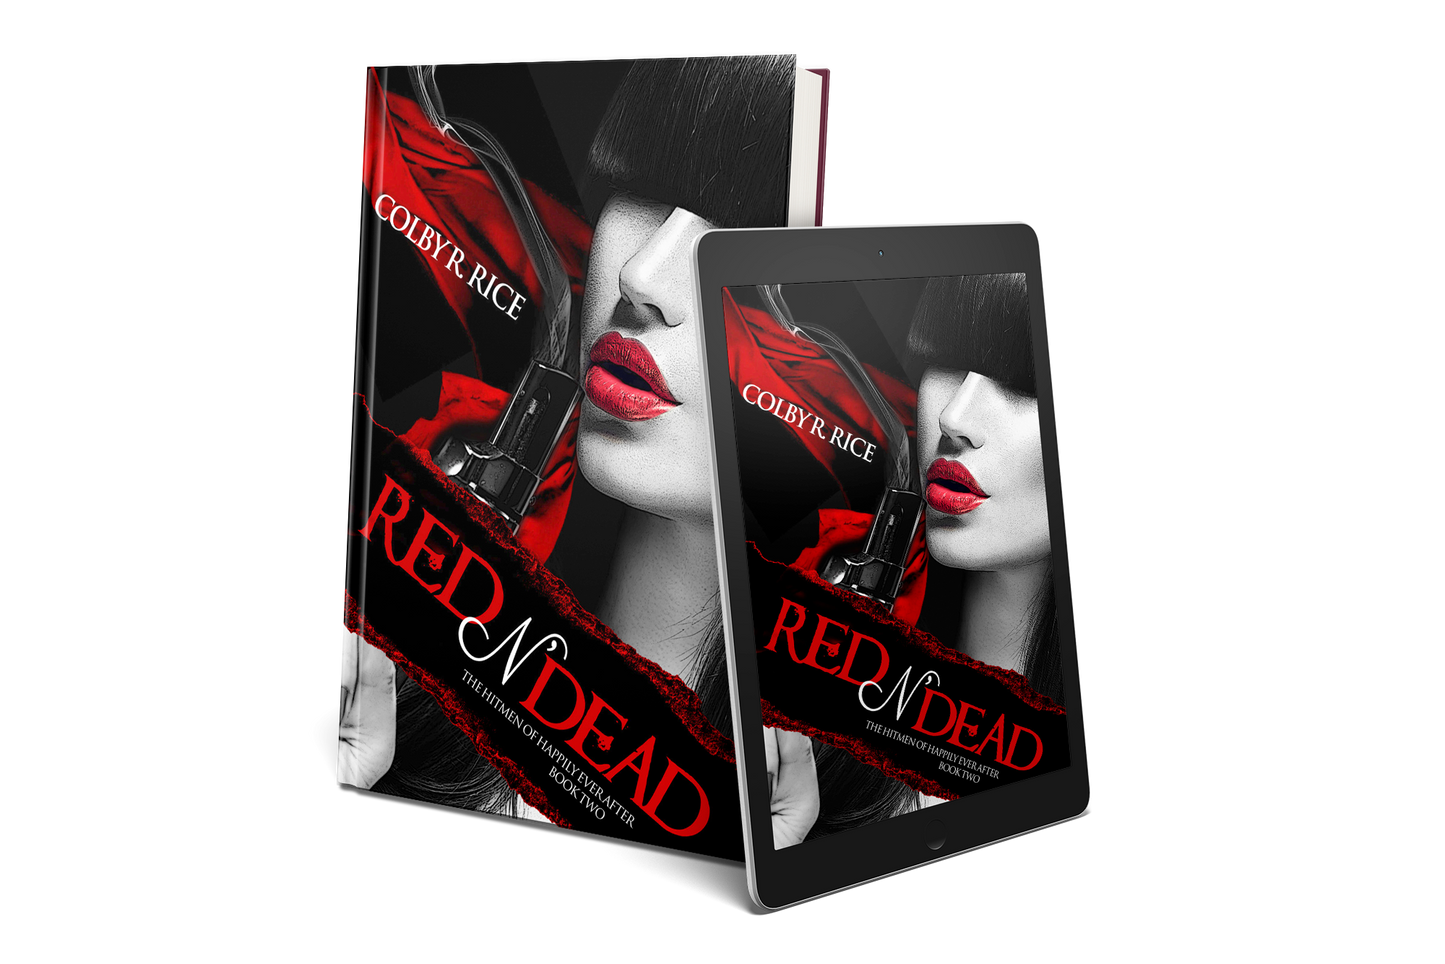 Red n' Dead (Hitmen of Happily Ever After, #2) - EBOOK (PRE-ORDER)